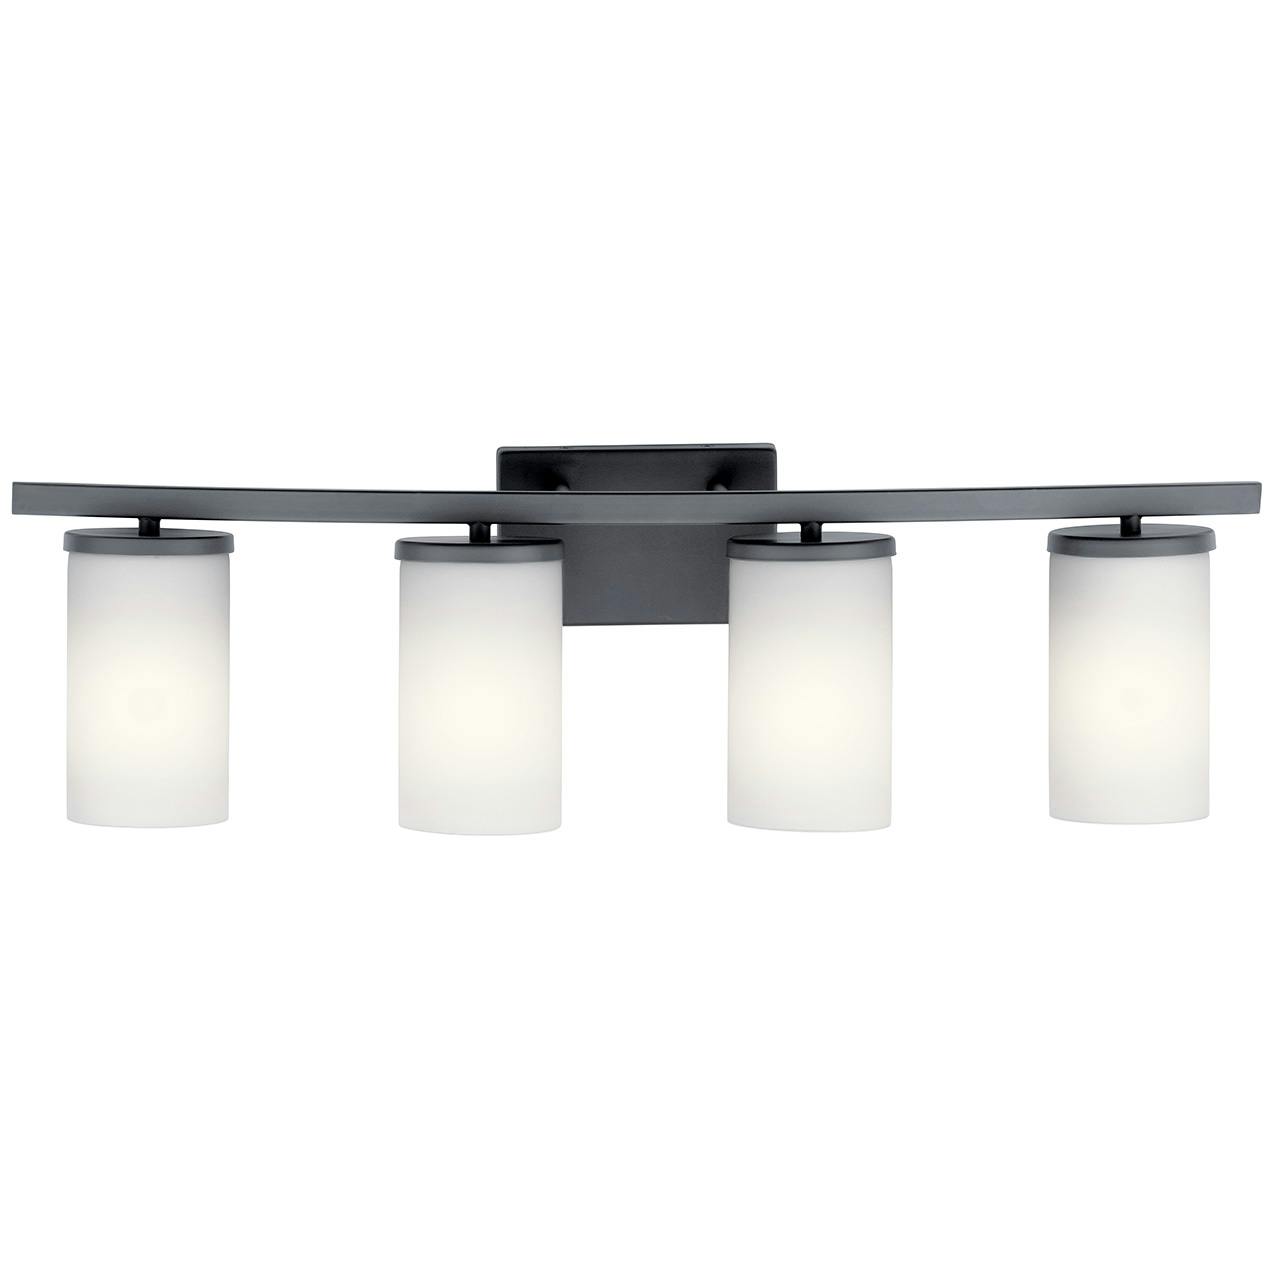 The Crosby 4 Light Vanity Light Black facing down on a white background